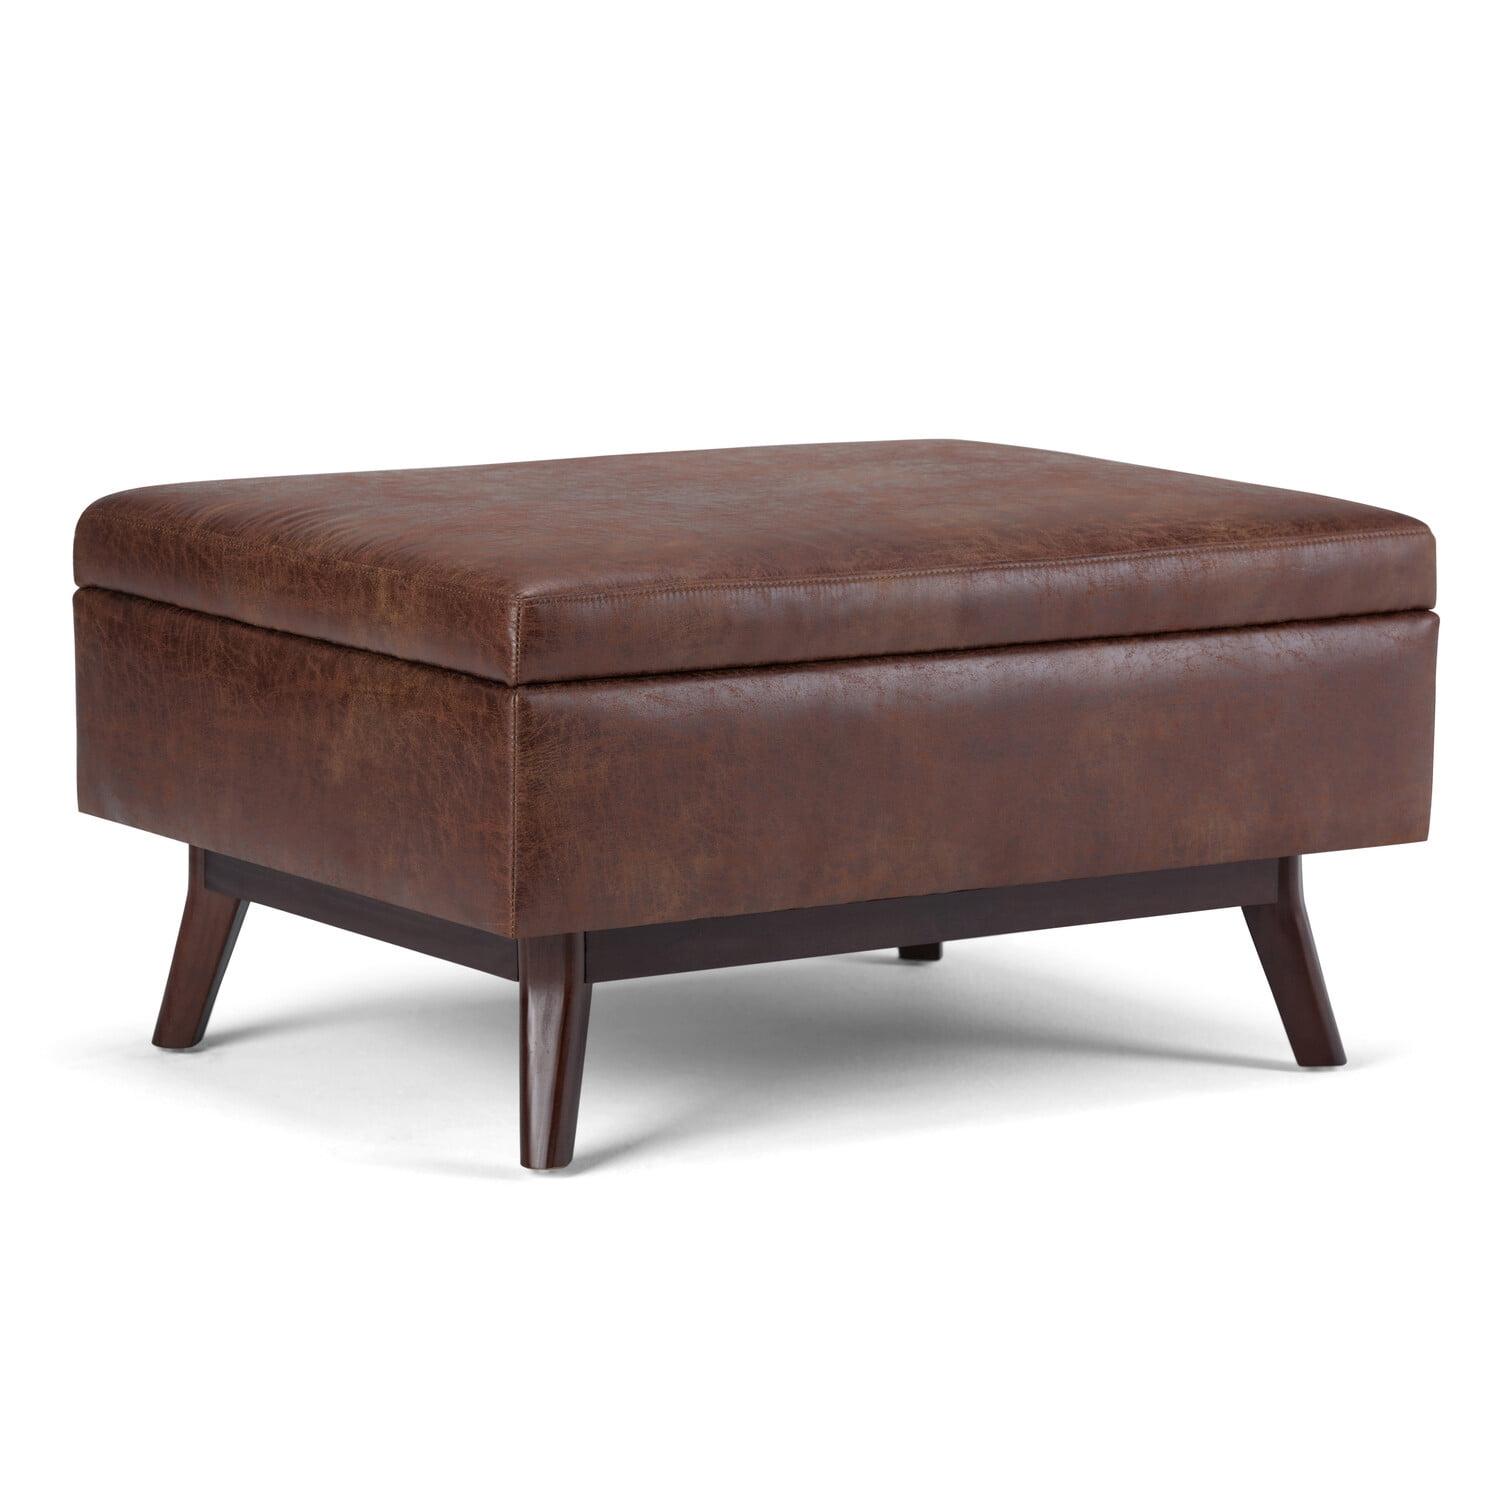 Distressed Saddle Brown Wood Storage Ottoman with Hydraulic Lift